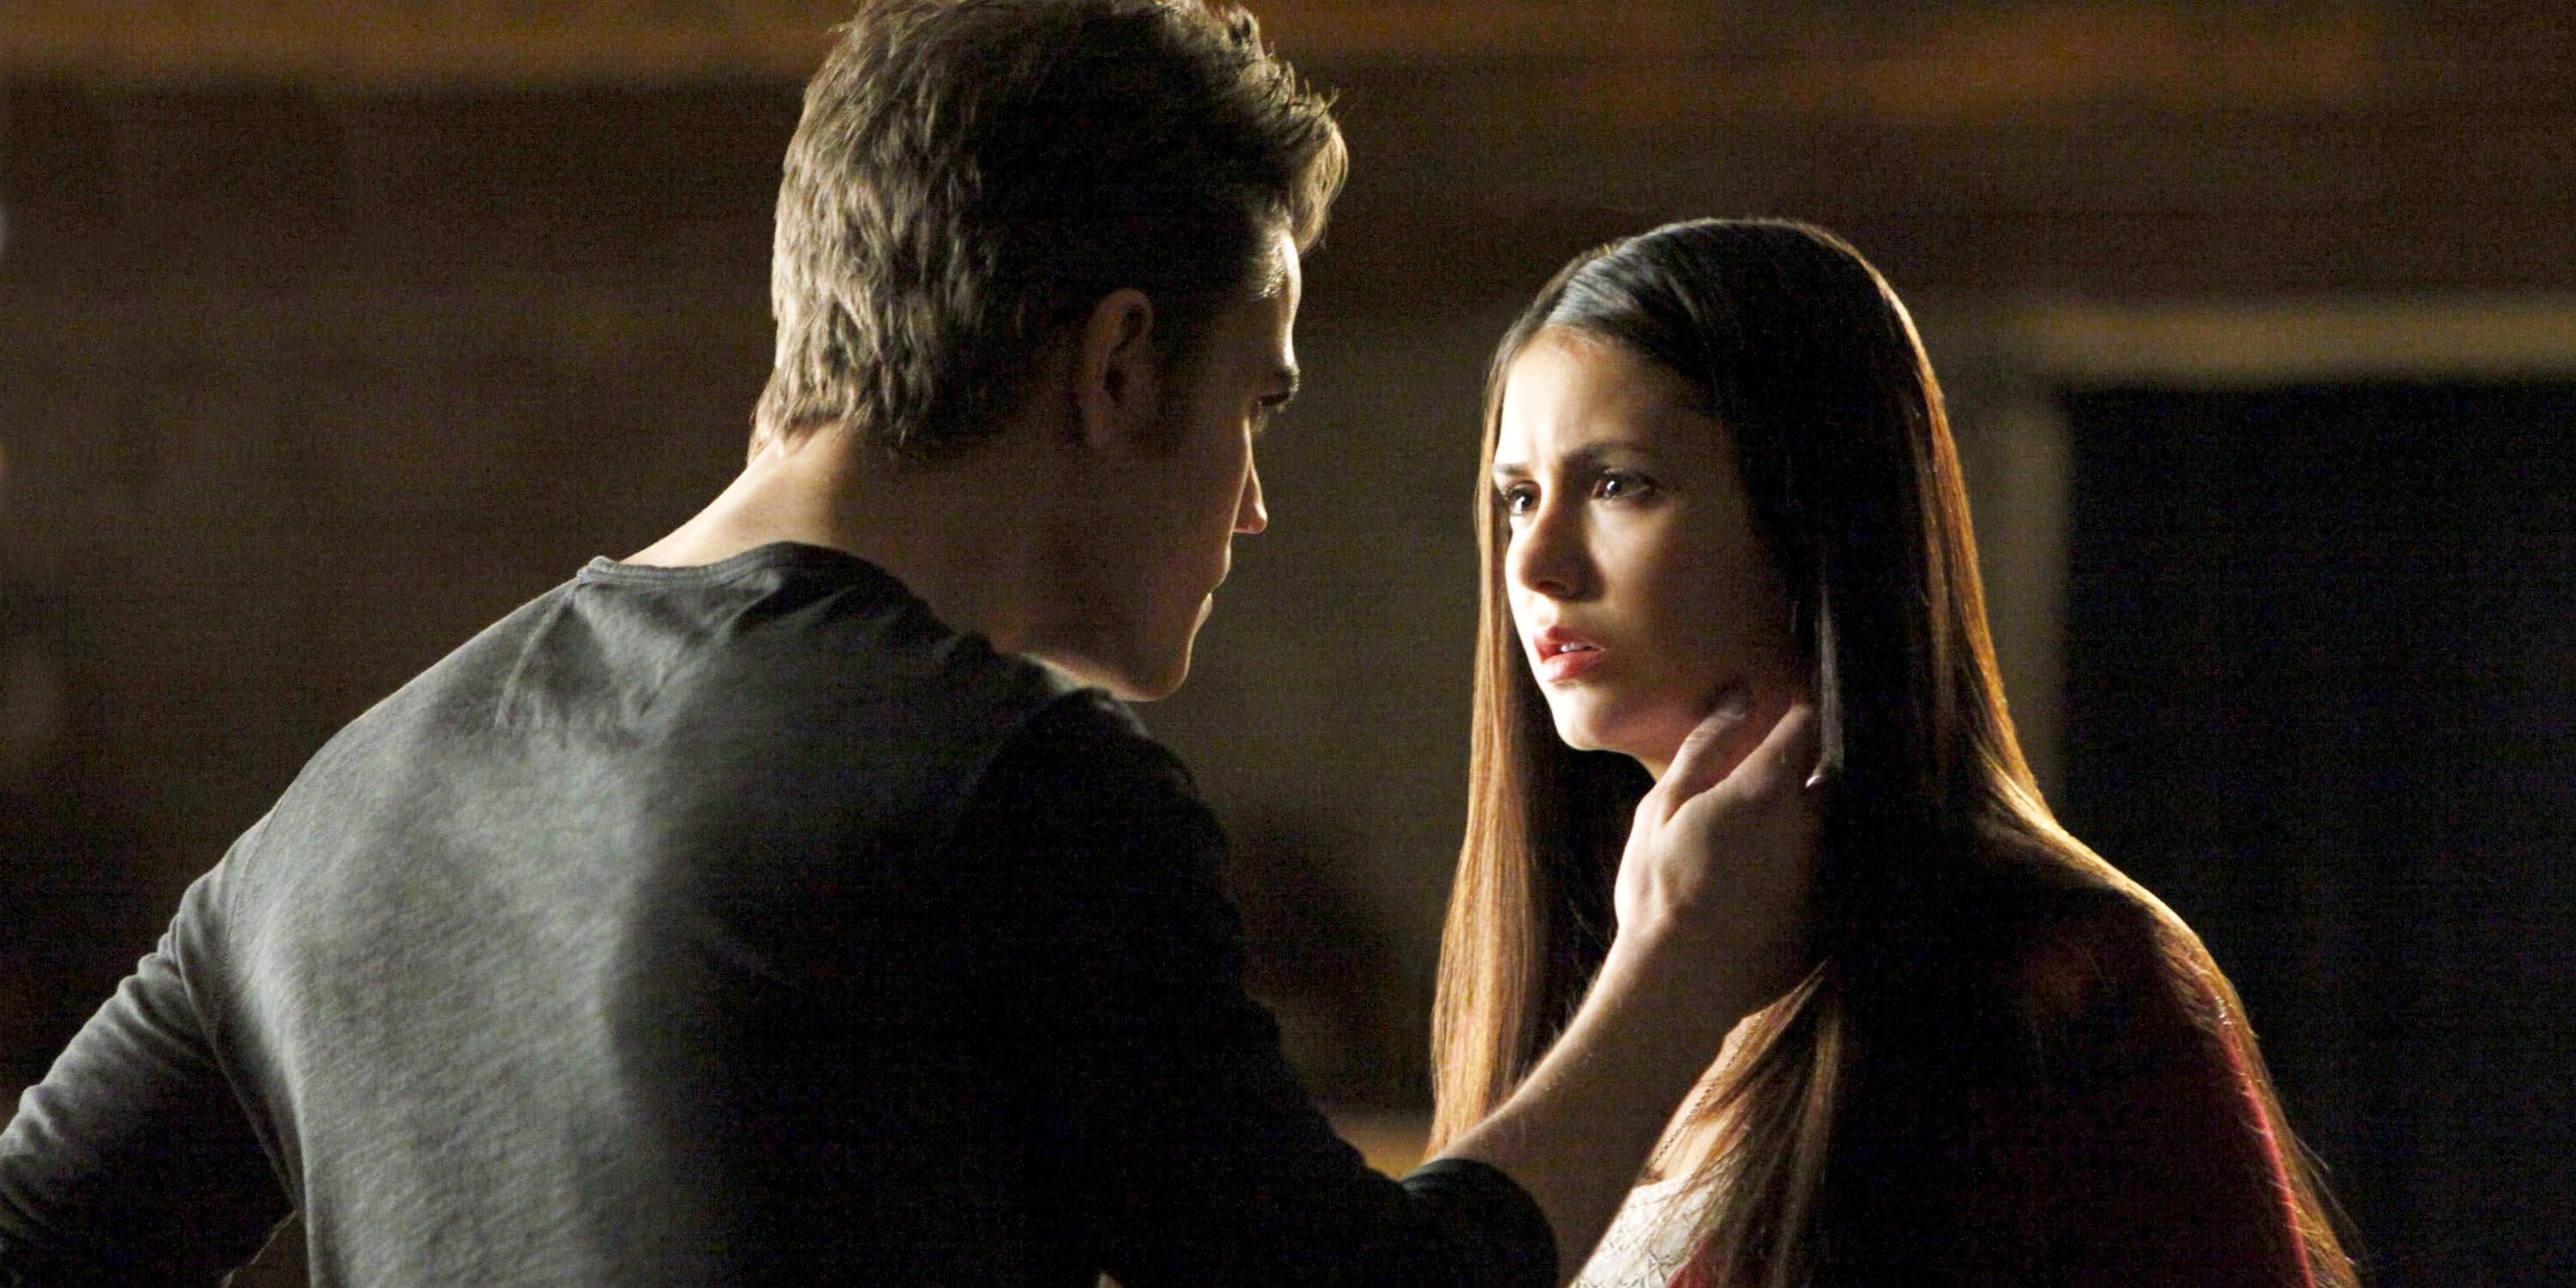 Stefan reaches out to Elena in The Vampire Diaries.